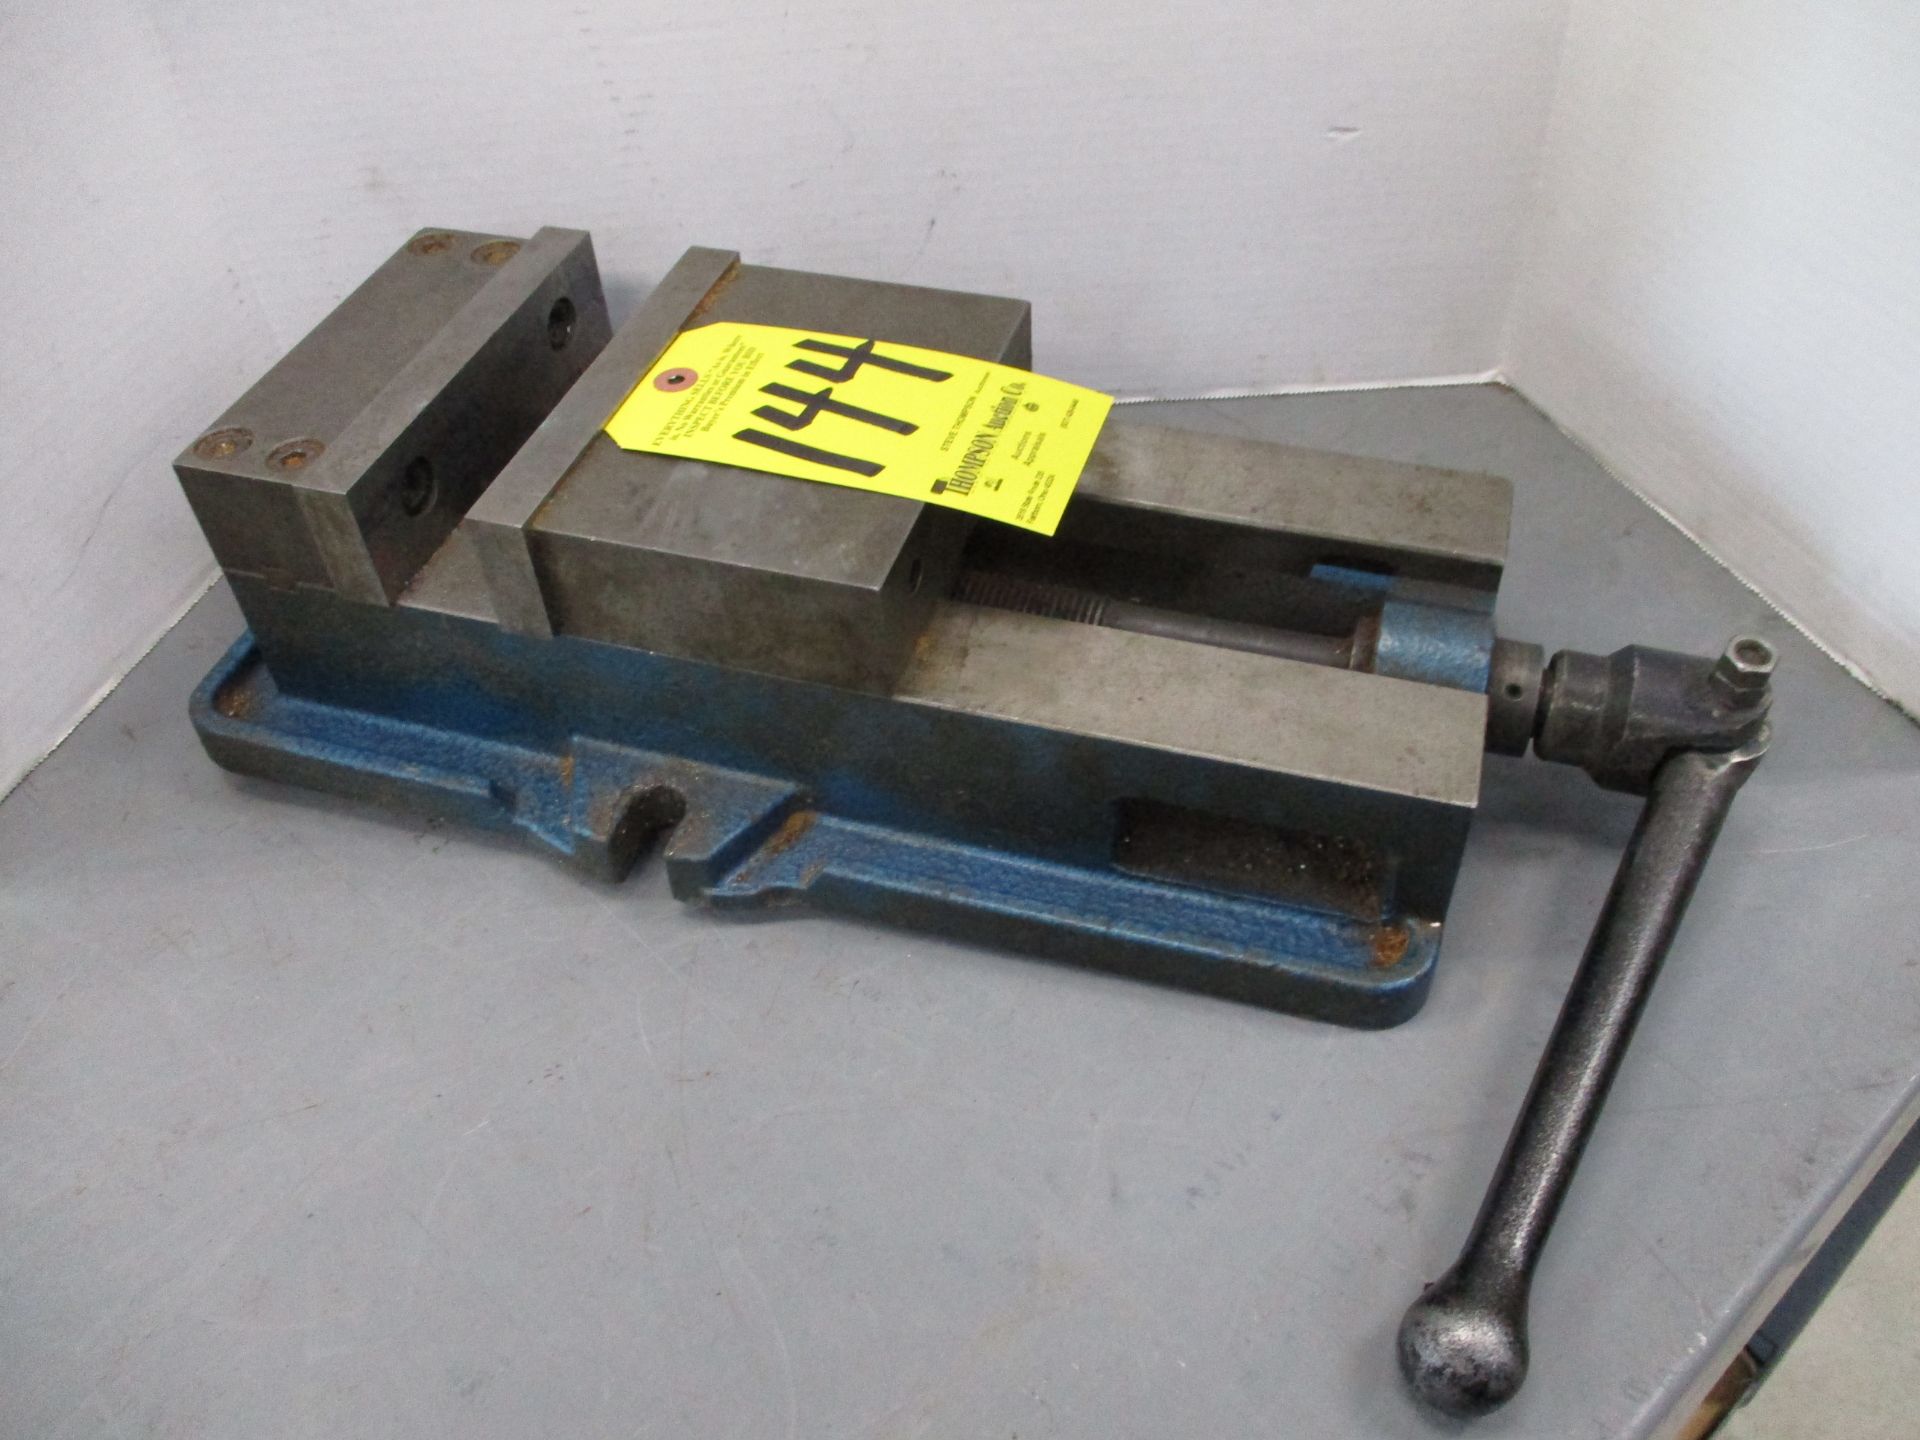 6" Mill Vise